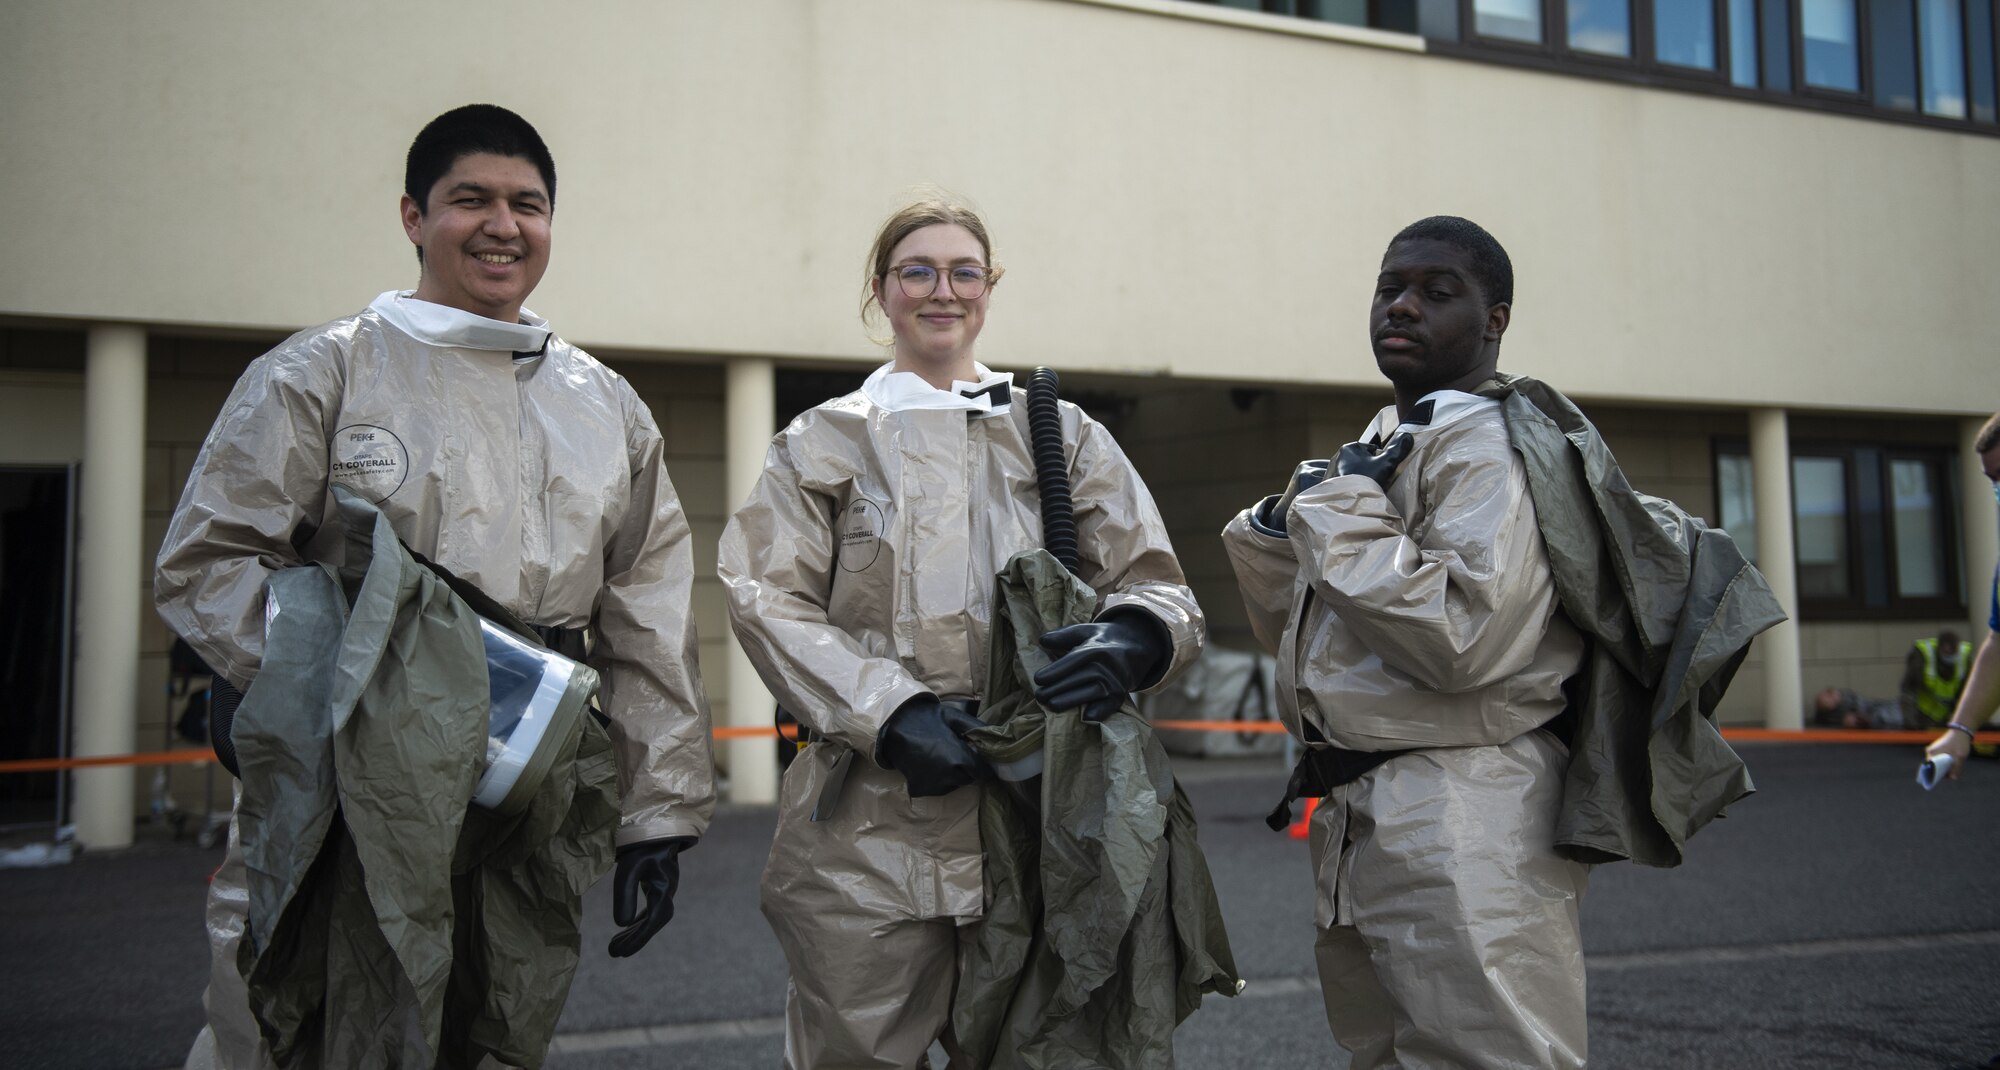 Three U.S. Air Force Airmen from the 52nd Medical Group Airmen pose for a photo near a decontamination site pop-up behind the Medical Group building at Spangdahlem Air Base, Germany, March 26, 2021. After the initial disaster simulation at the base theater, patients were transported to the decontamination site where Medical Group Airmen awaited their arrival and performed simulated decontamination procedures. (U.S. Air Force photo by Senior Airman Ali Stewart)